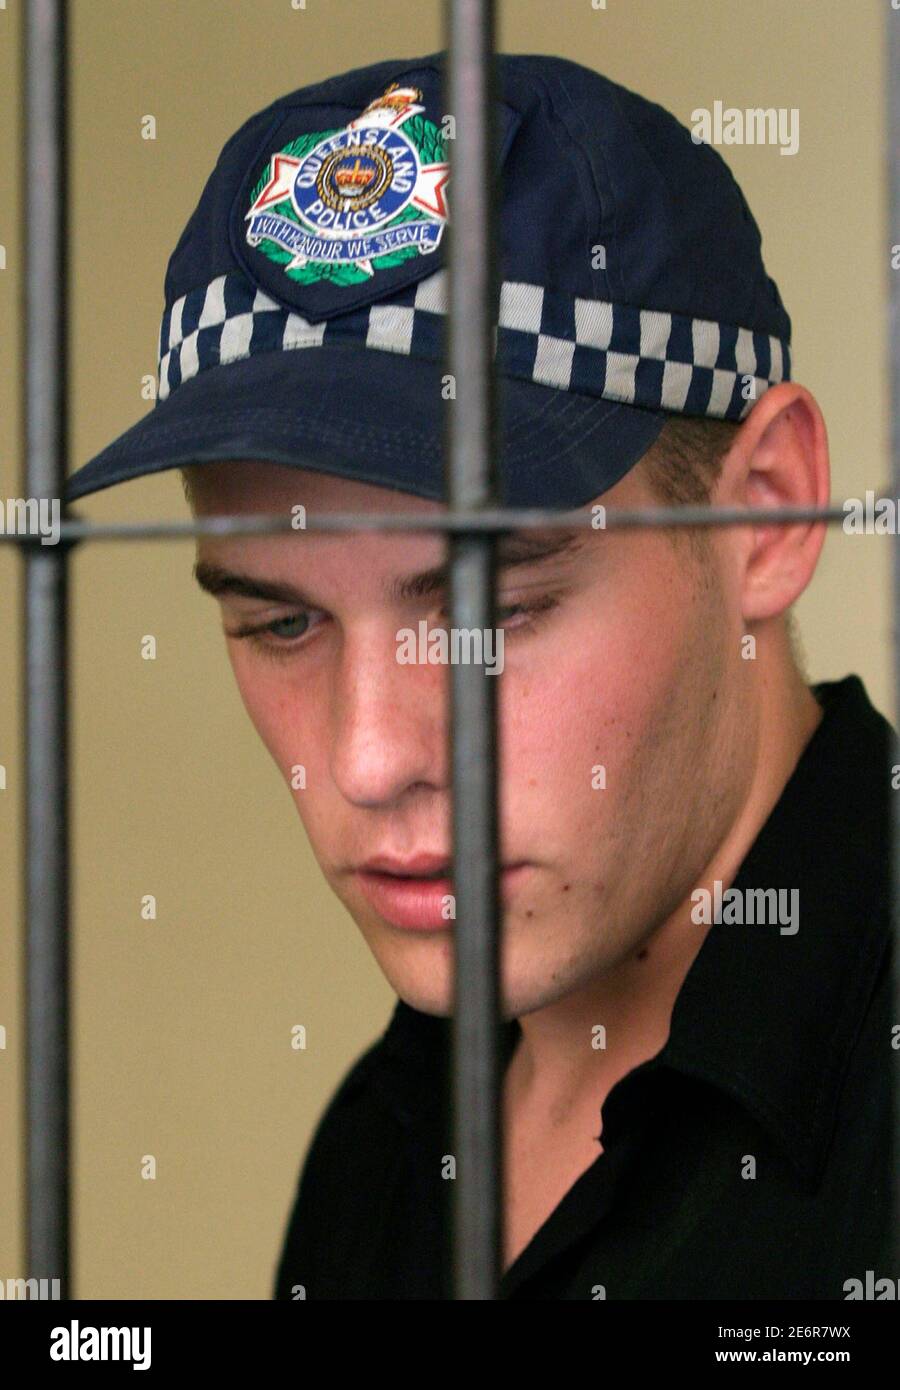 Australian Matthew Norman, part of the "Bali Nine" gang, wears a cap with  the words "Queensland Police" while he waits in a temporary cell for the  first day of a judicial review